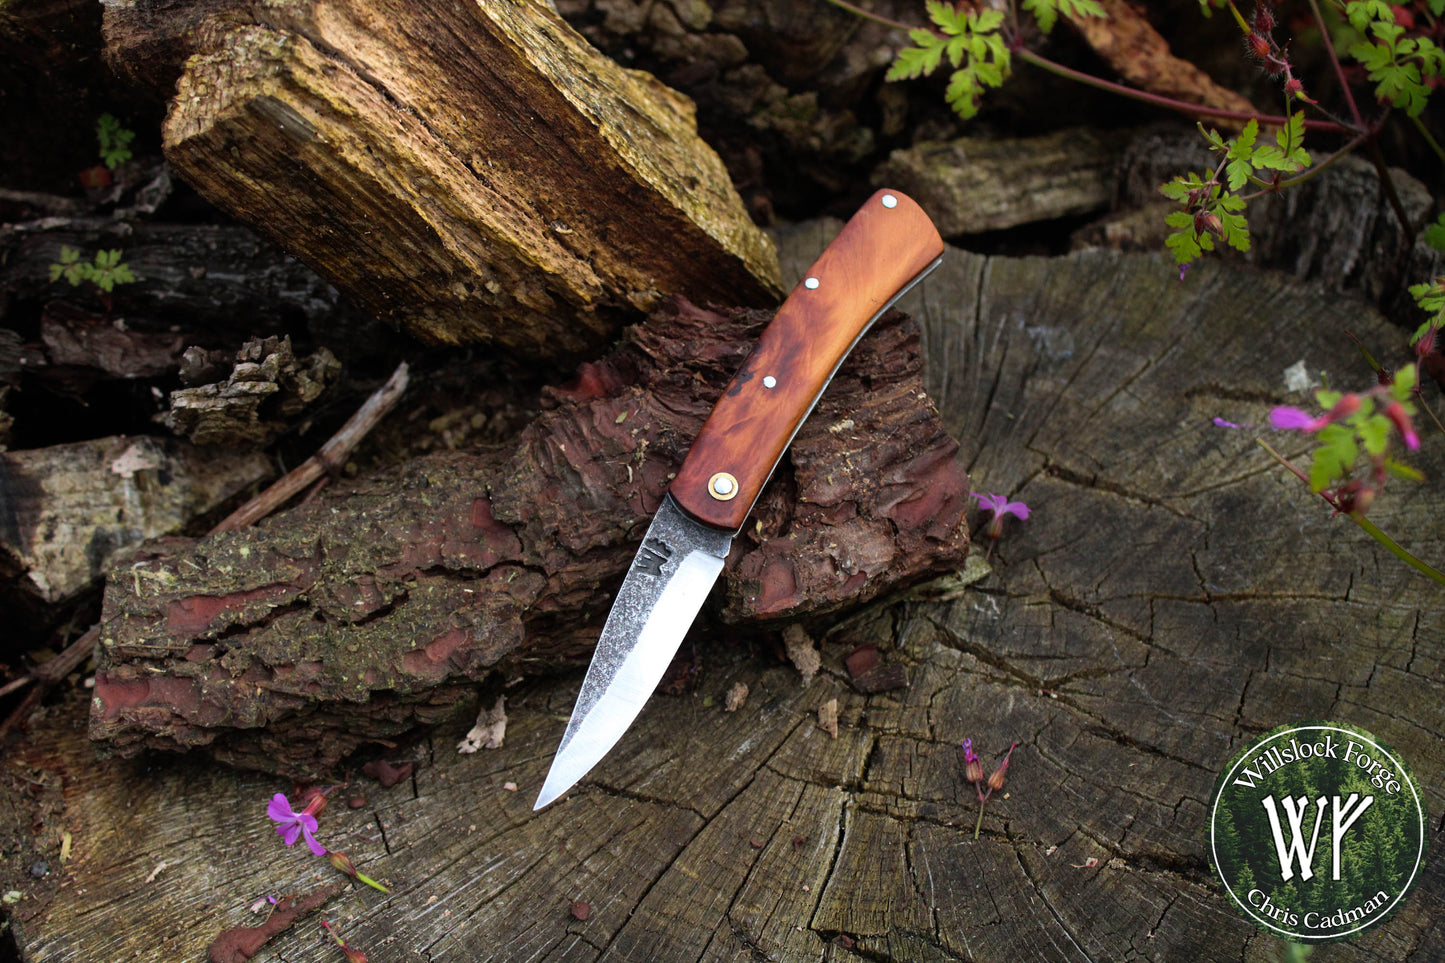 Hand-forged Slipjoint / Heavy Duty Folding Knife / O1 Tool Steel blade with English Yew Burl Scales / UK Legal Pocketknife